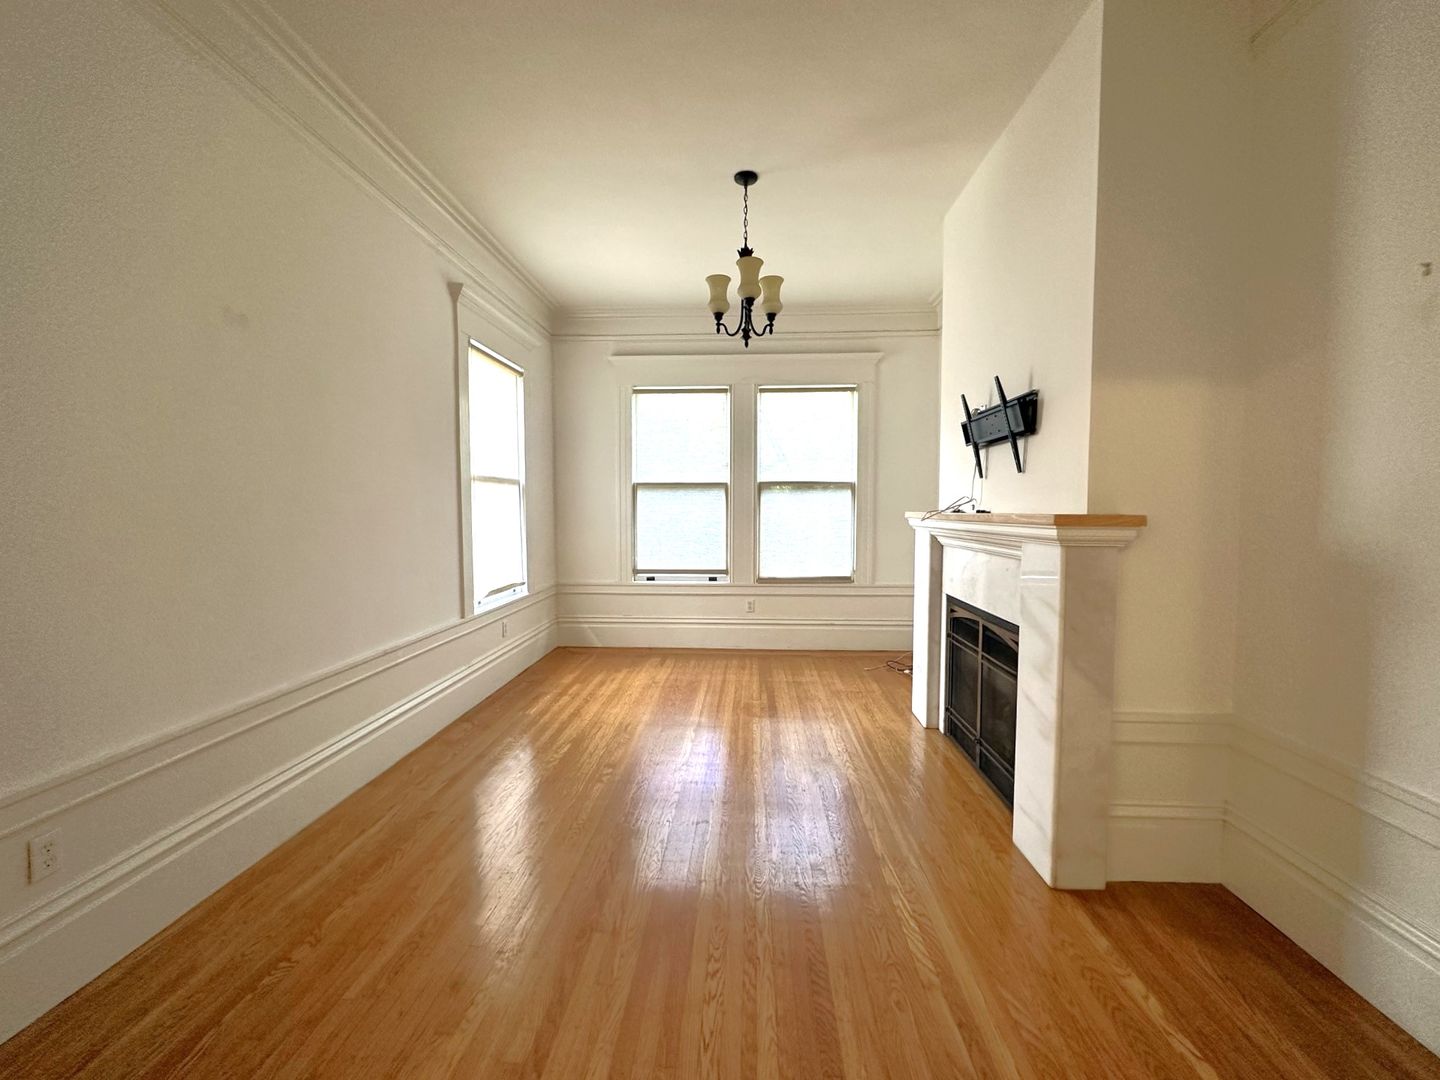 Epic REA - Spacious Edwardian 1bd/ 1ba Condo in Alamo Square with in-unit W/D